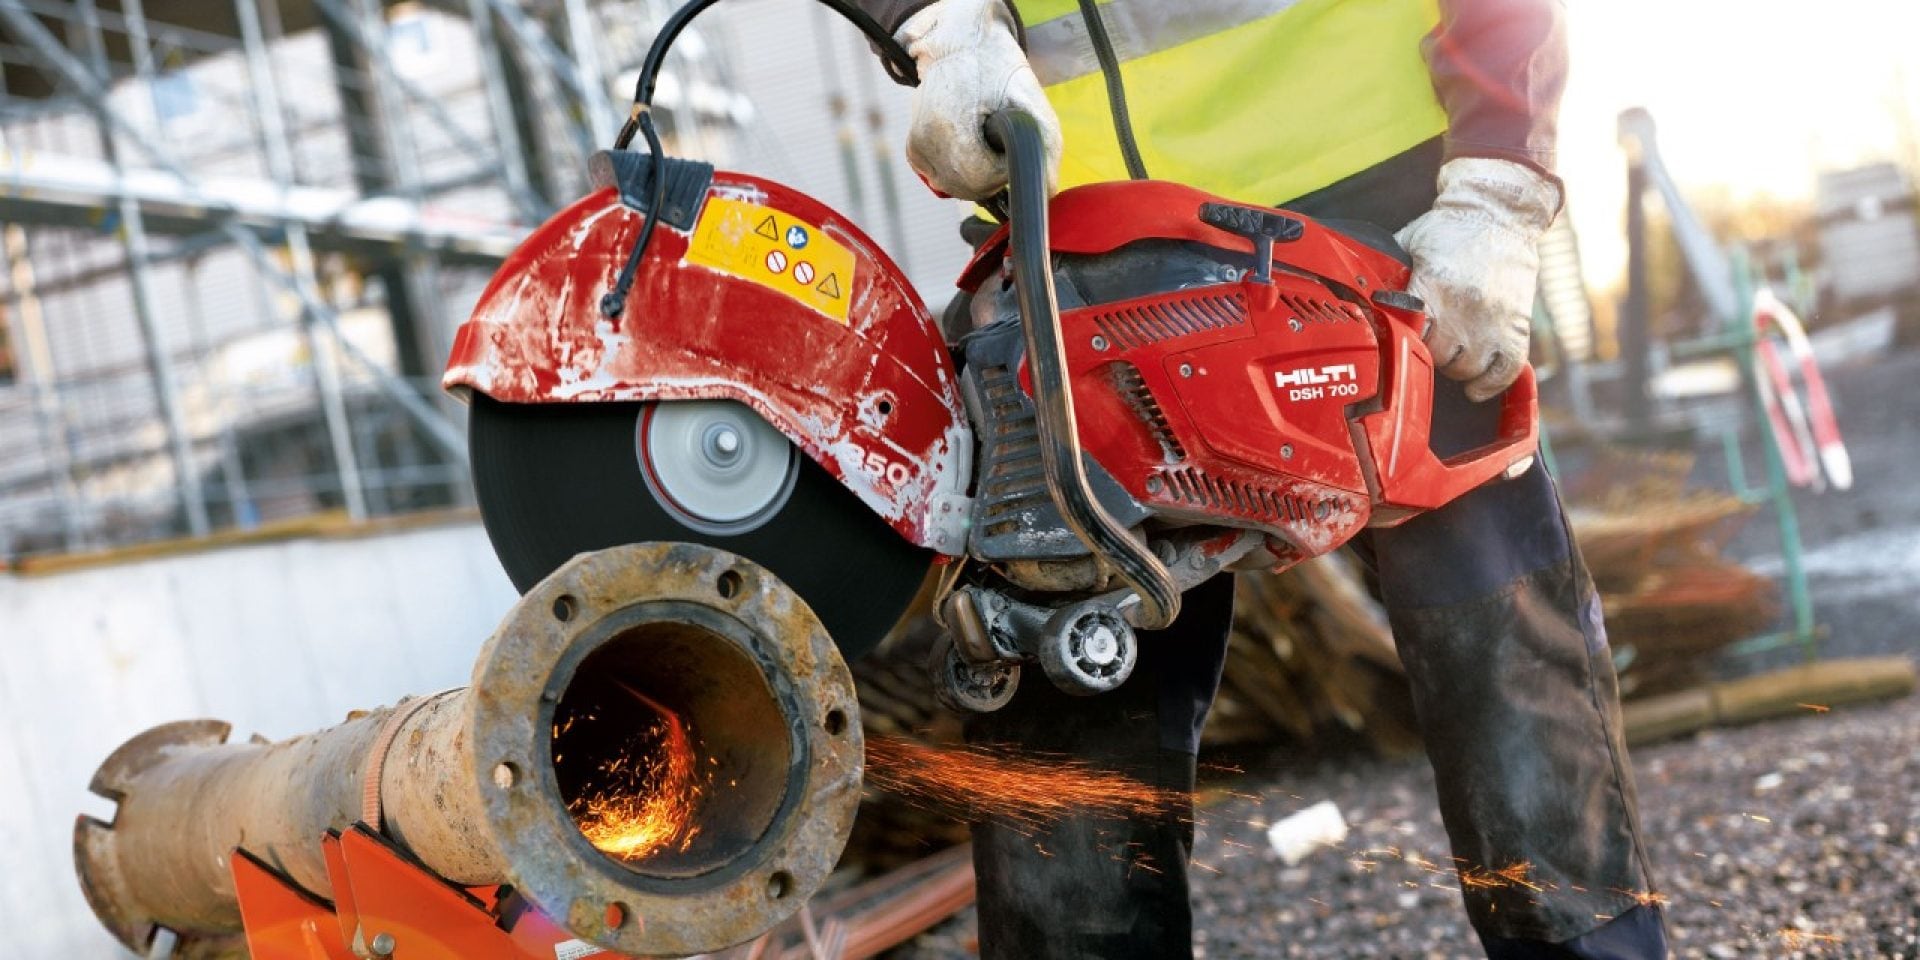 find a Hilti rental location or authorized distributor